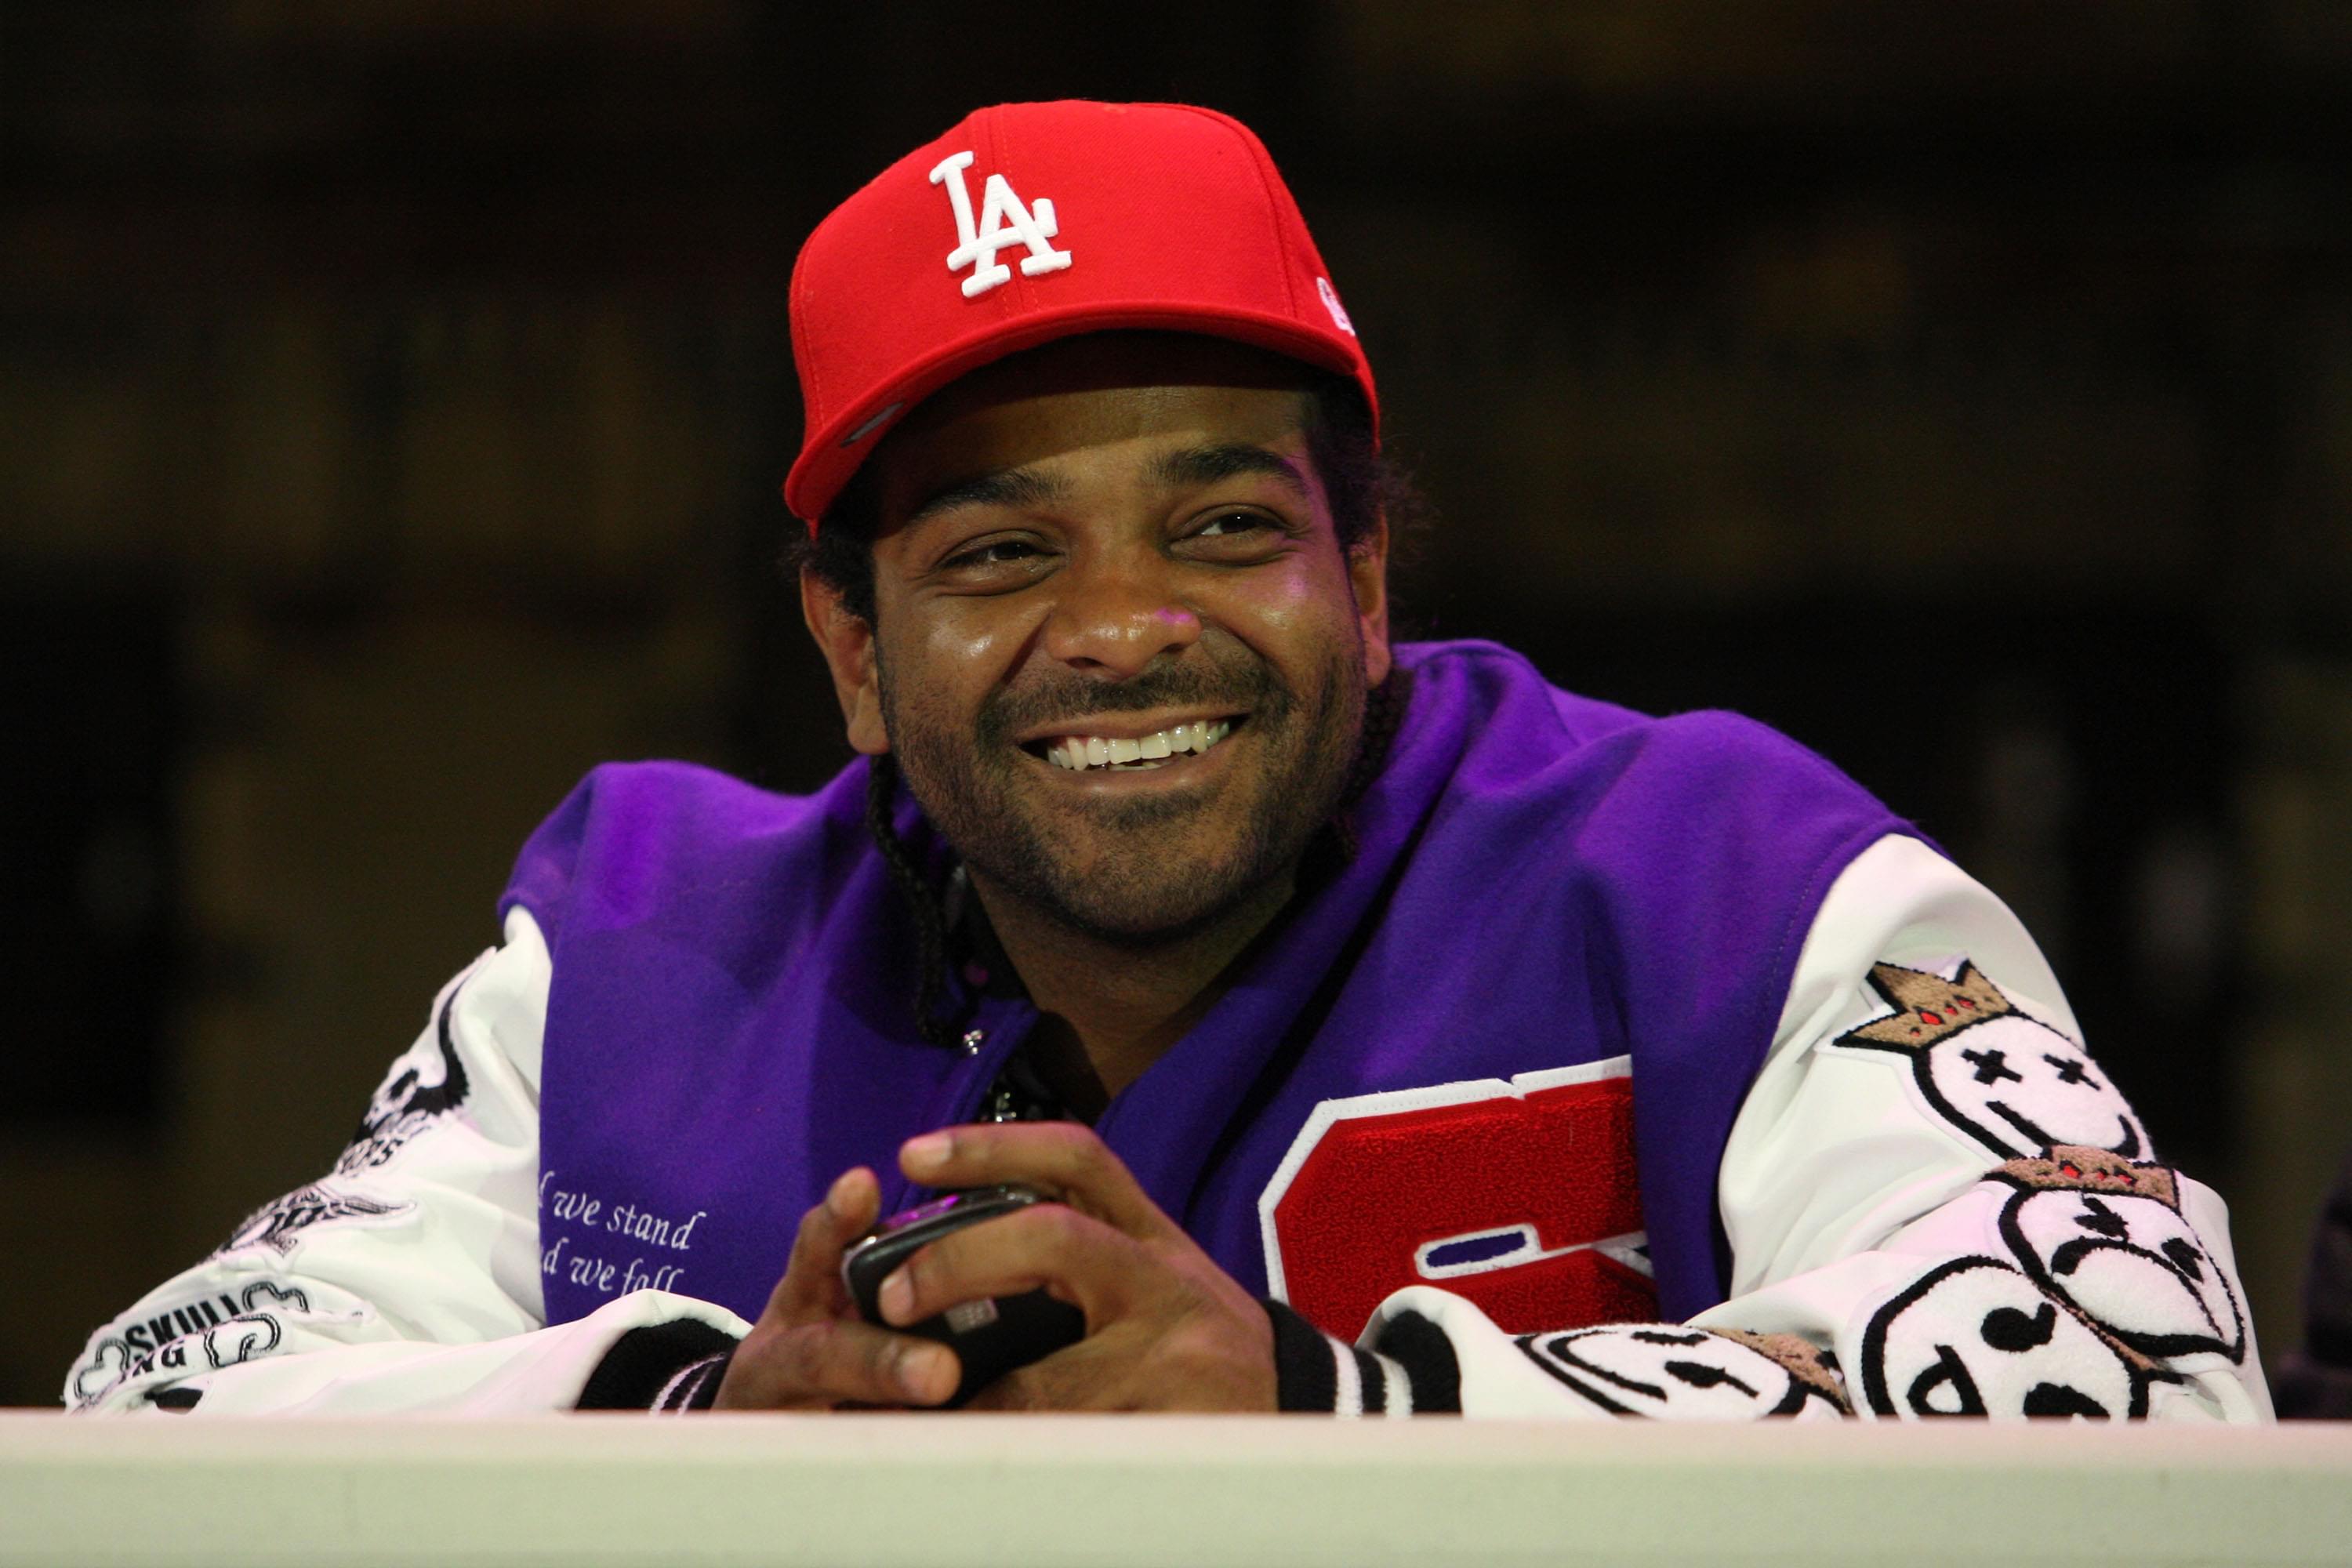 Jim Jones Hit With Five Felony Charges